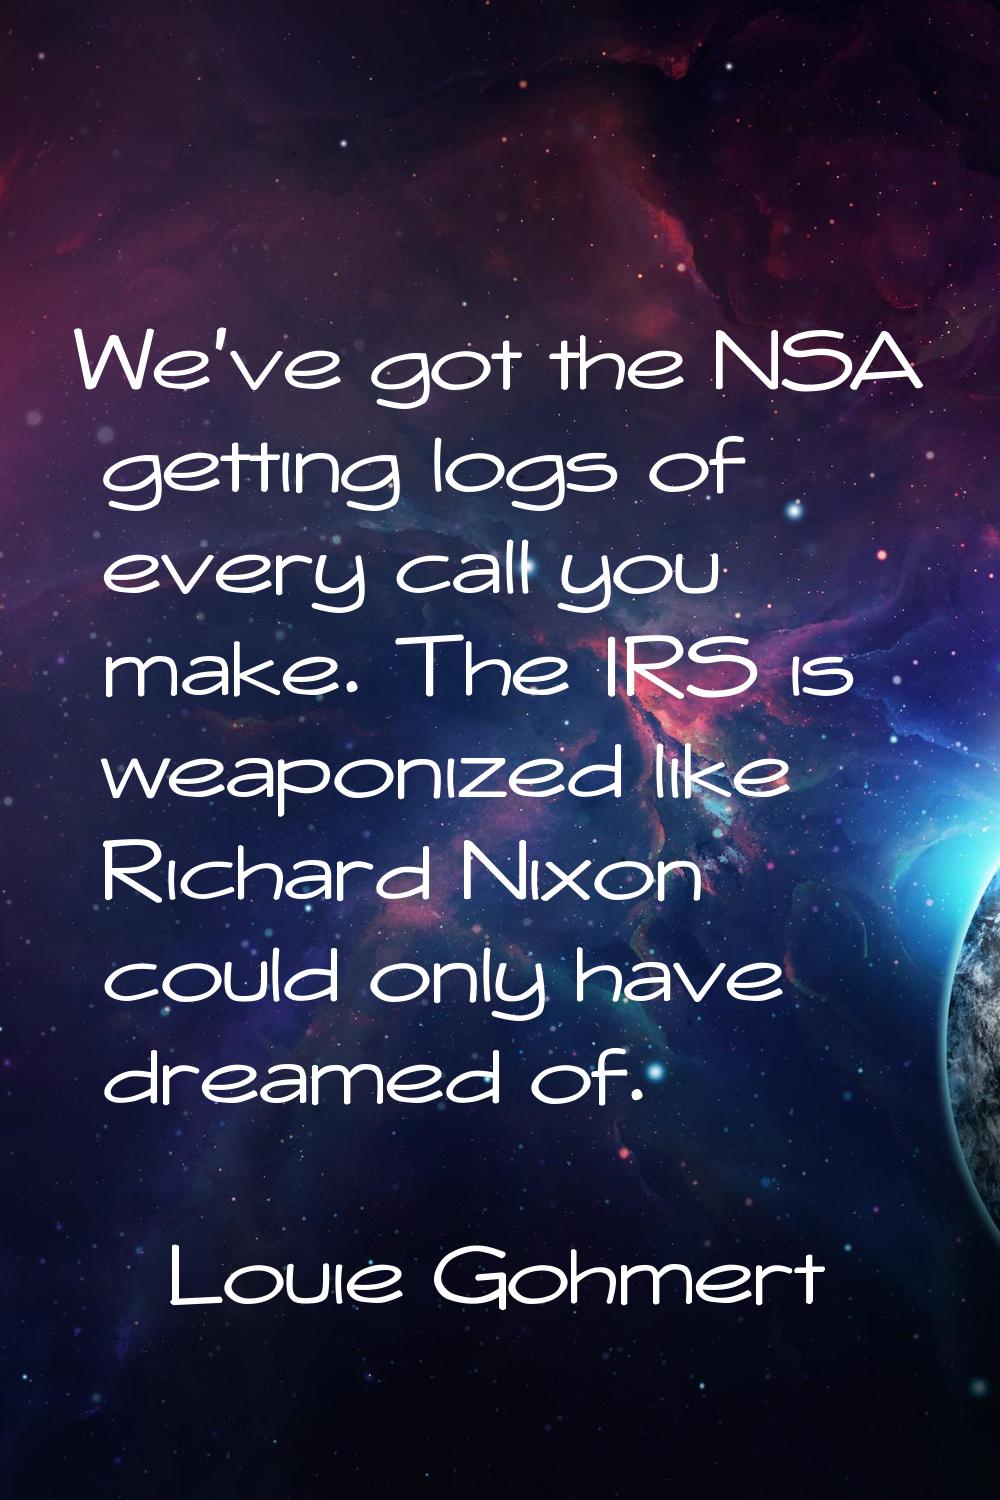 We've got the NSA getting logs of every call you make. The IRS is weaponized like Richard Nixon cou